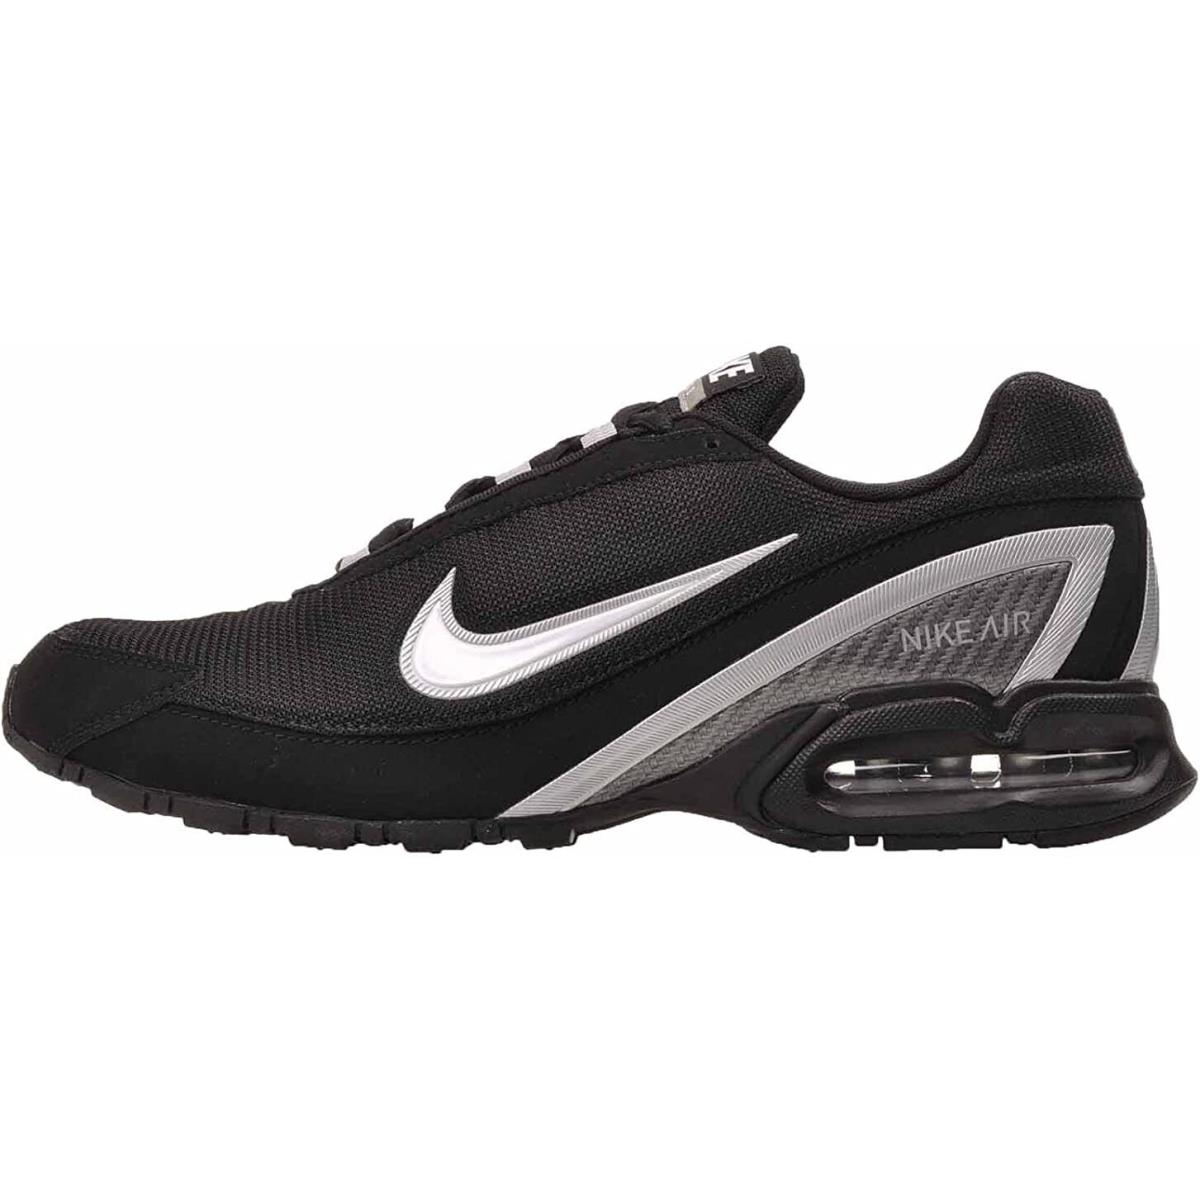 Nike Air Max Torch 3 319116-011 Men`s Black White Athletic Sneaker Shoes TV294